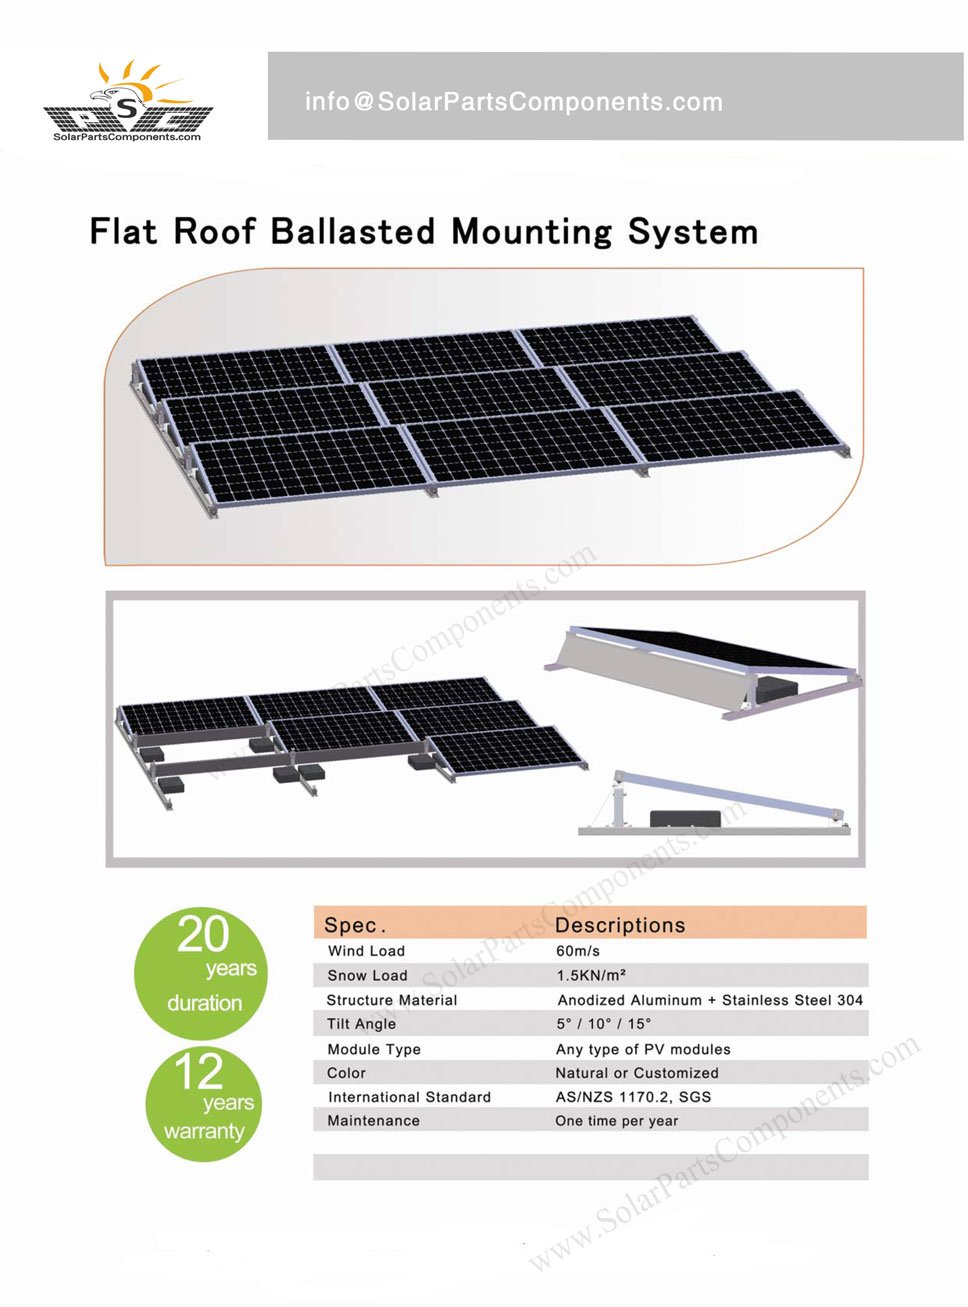 Ballasted Flat Roof Mounting System